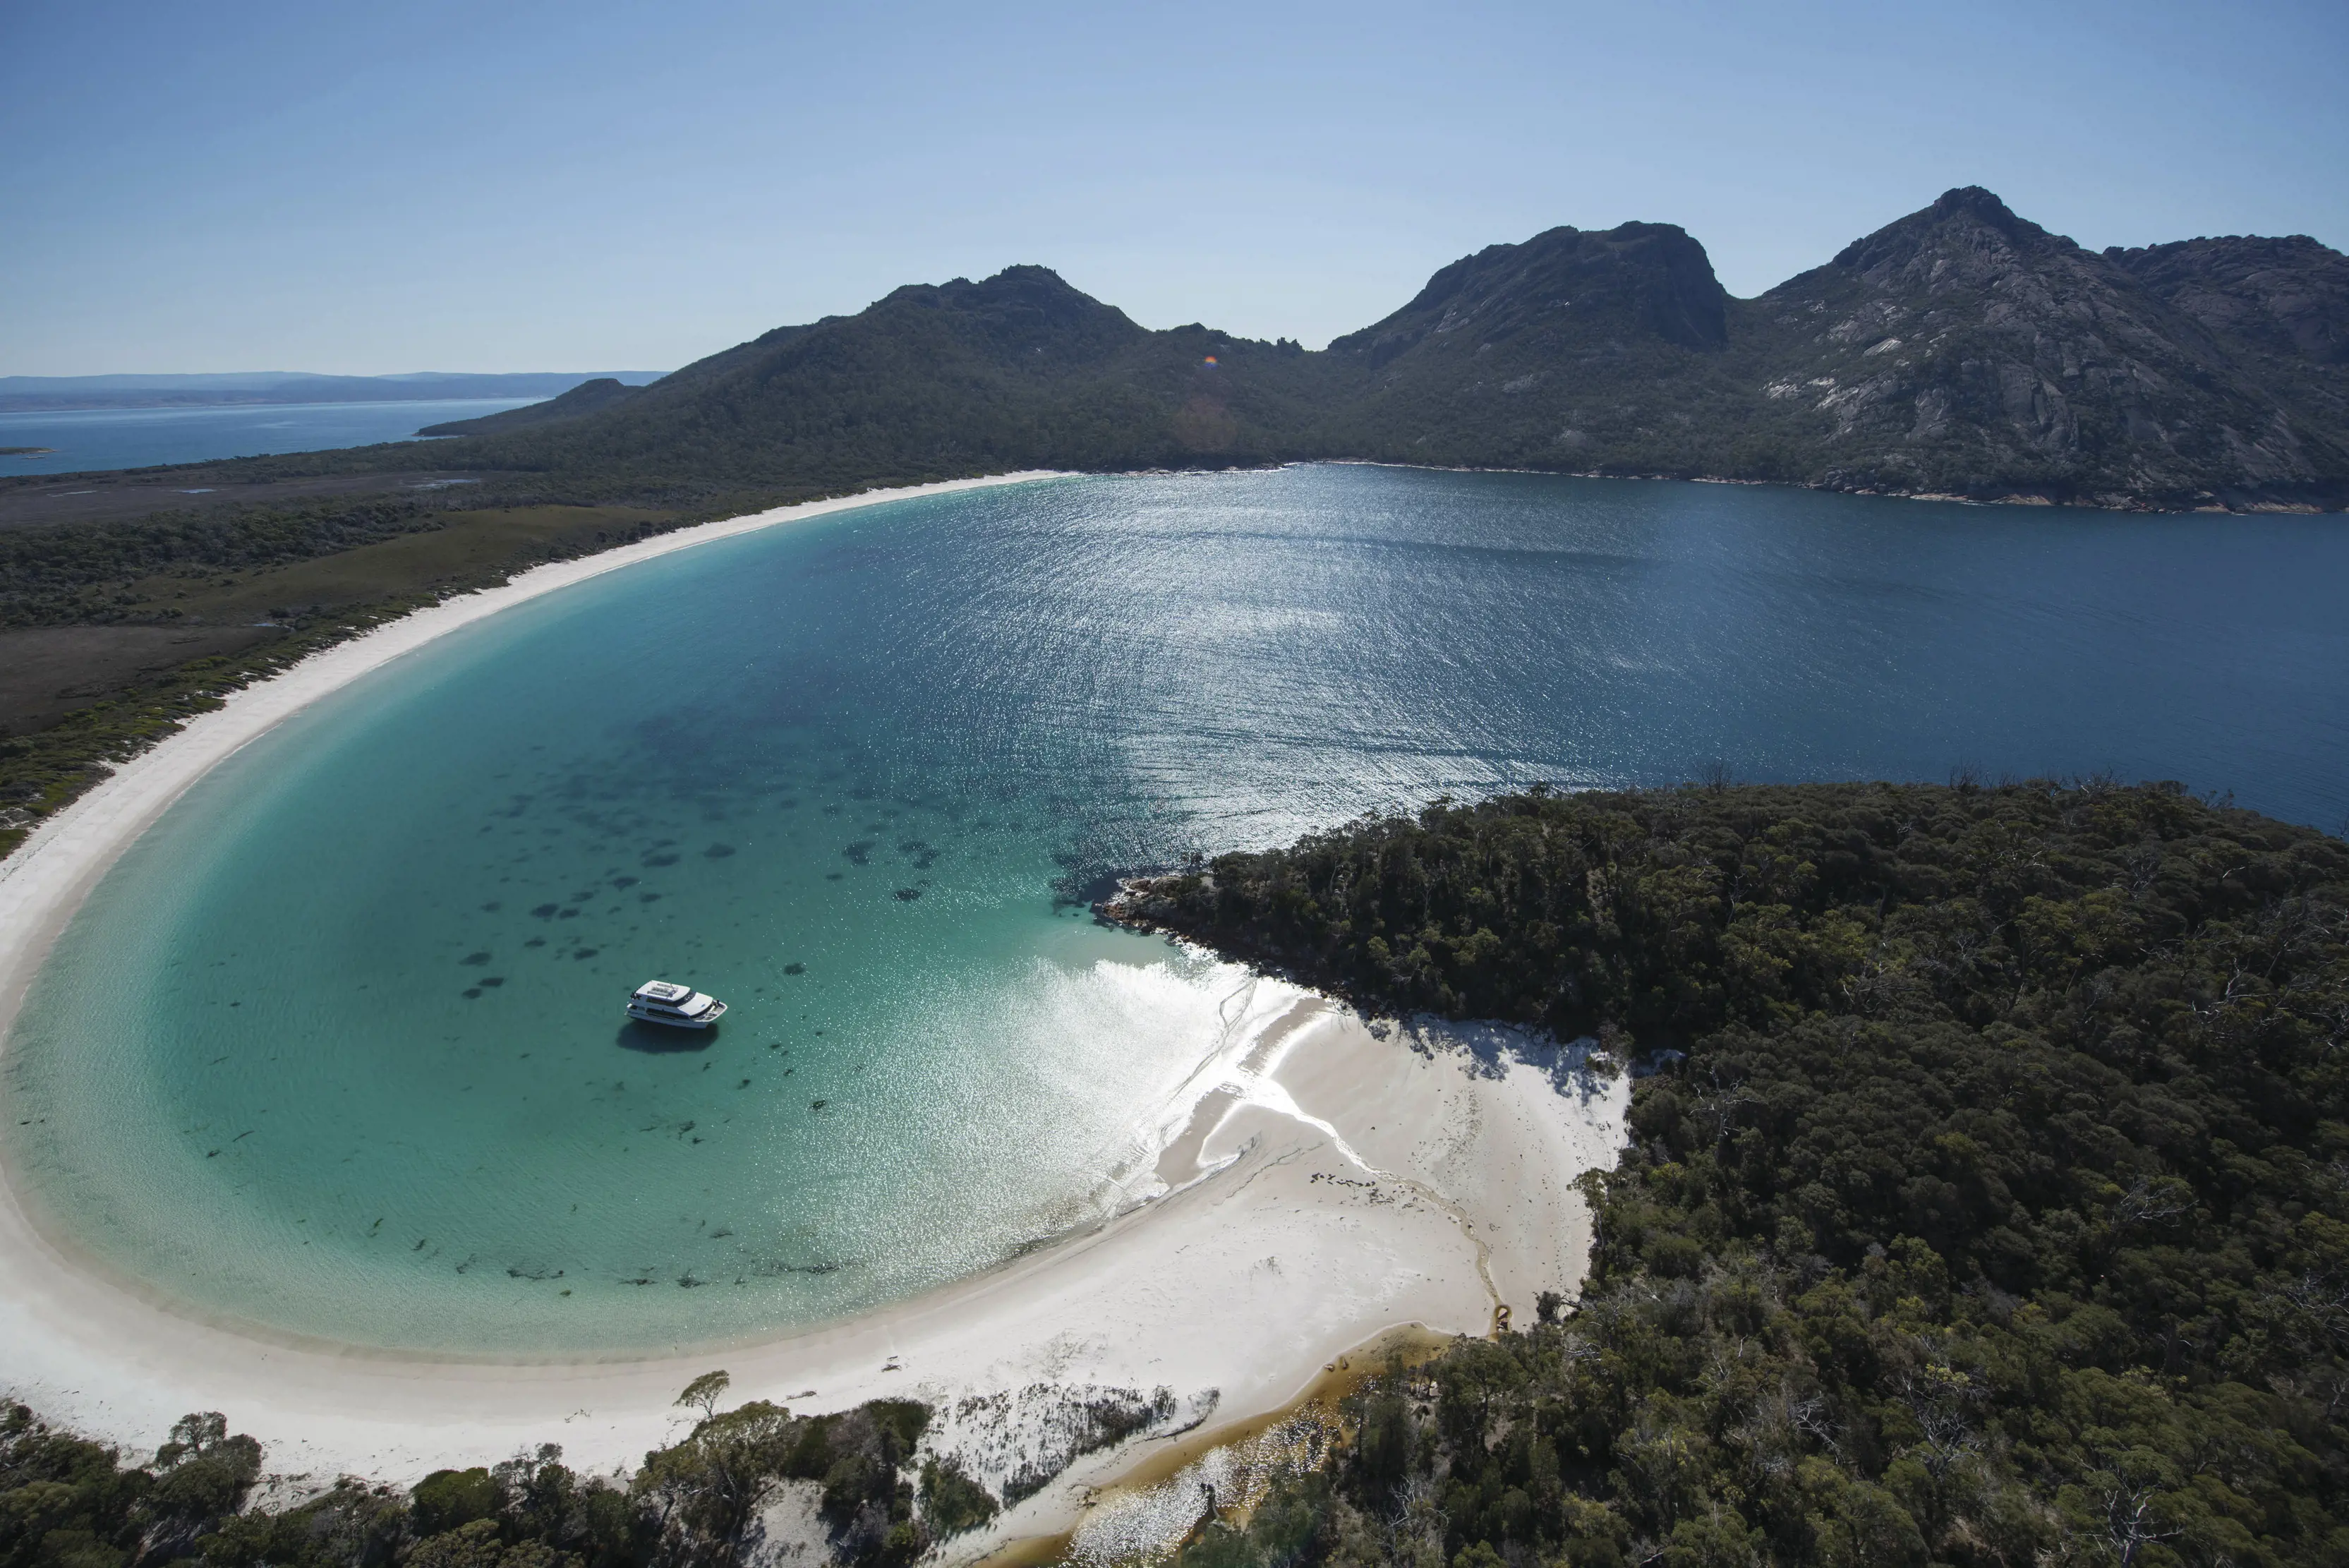 Stunning aerial image of Wineglass Bay on a clear, sunny day with crystal clear, blue water. Wineglass Bay Cruise boat is docked within the Bay.